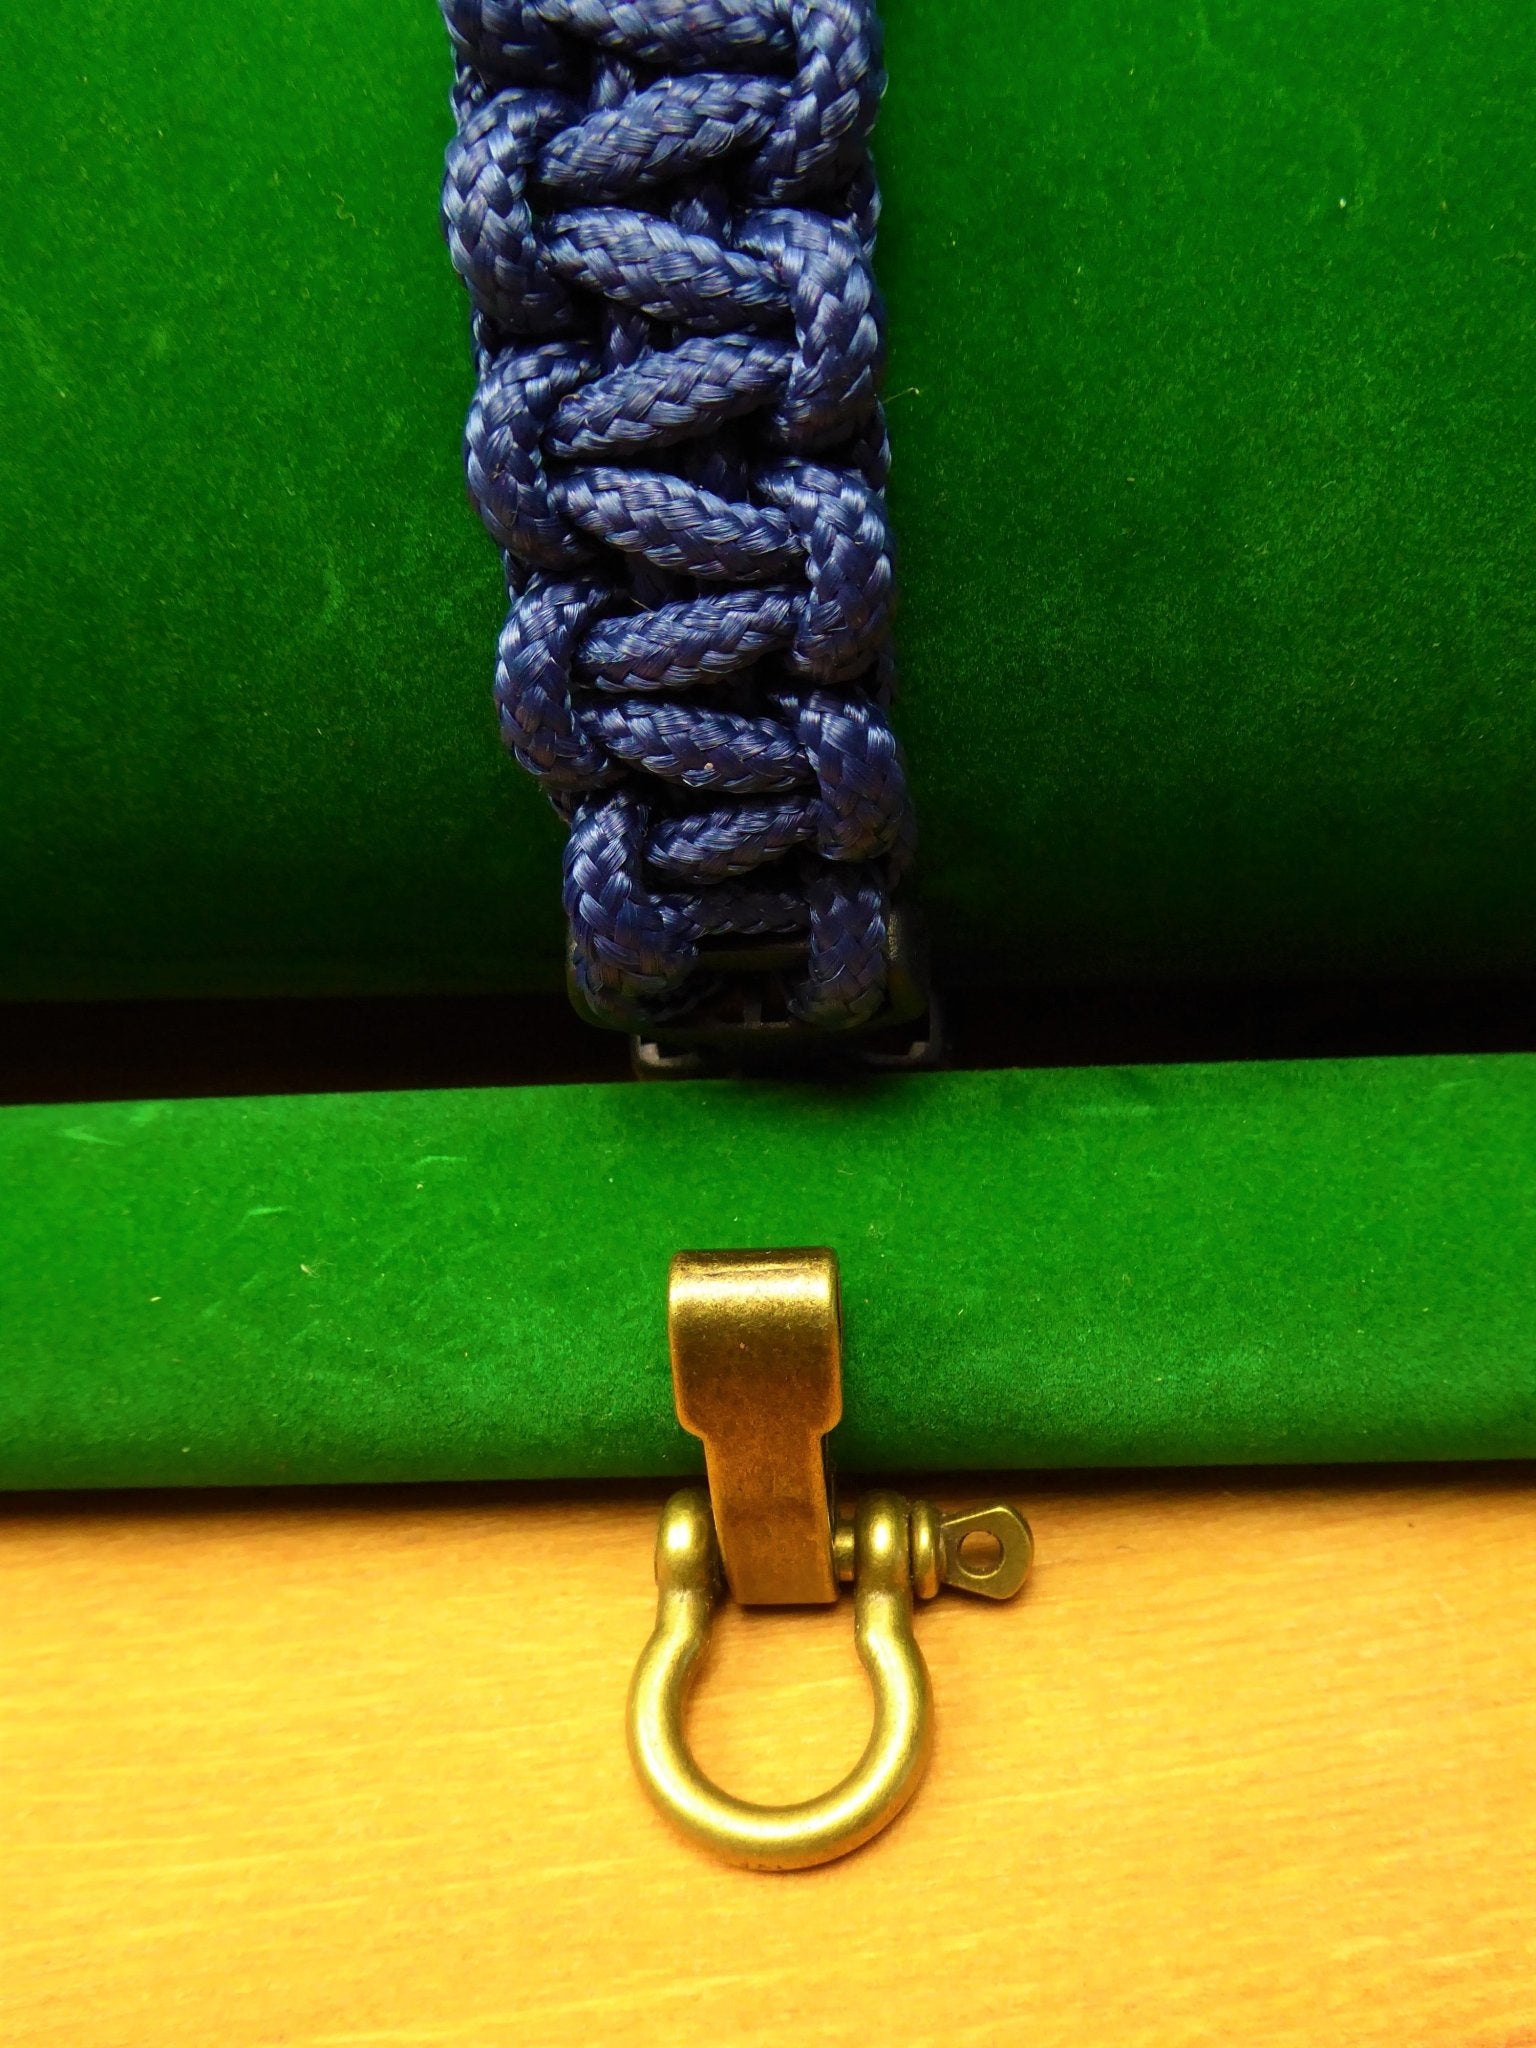 Paracord Buckle Bracelet kits with choice of colours Paracord Huggins Attic Navy Blue Antique Brass  [Huggins attic]